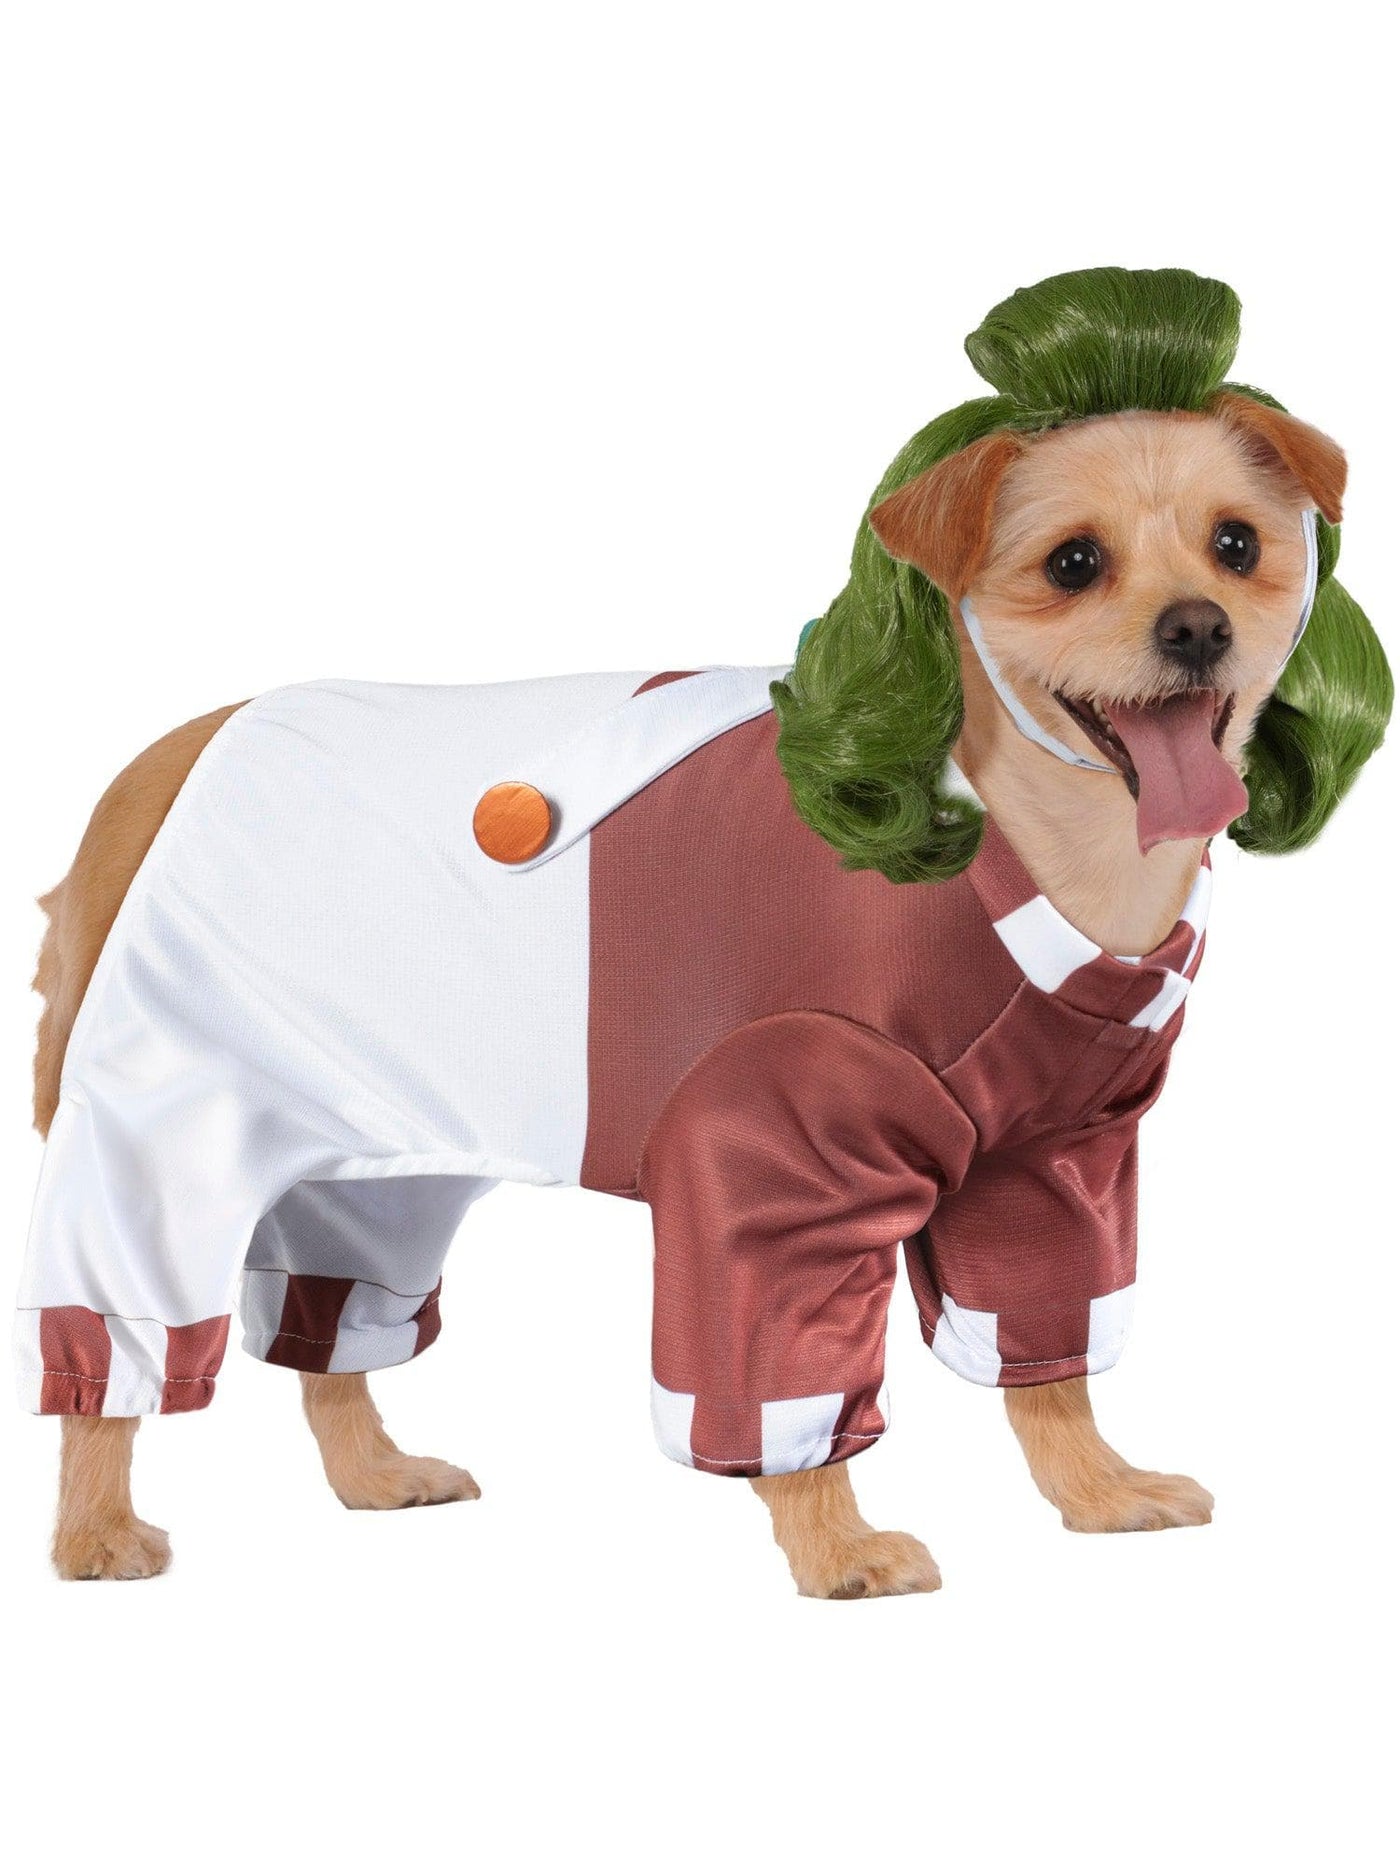 Willy Wonka & the Chocolate Factory Oompa Loompa Pet Costume